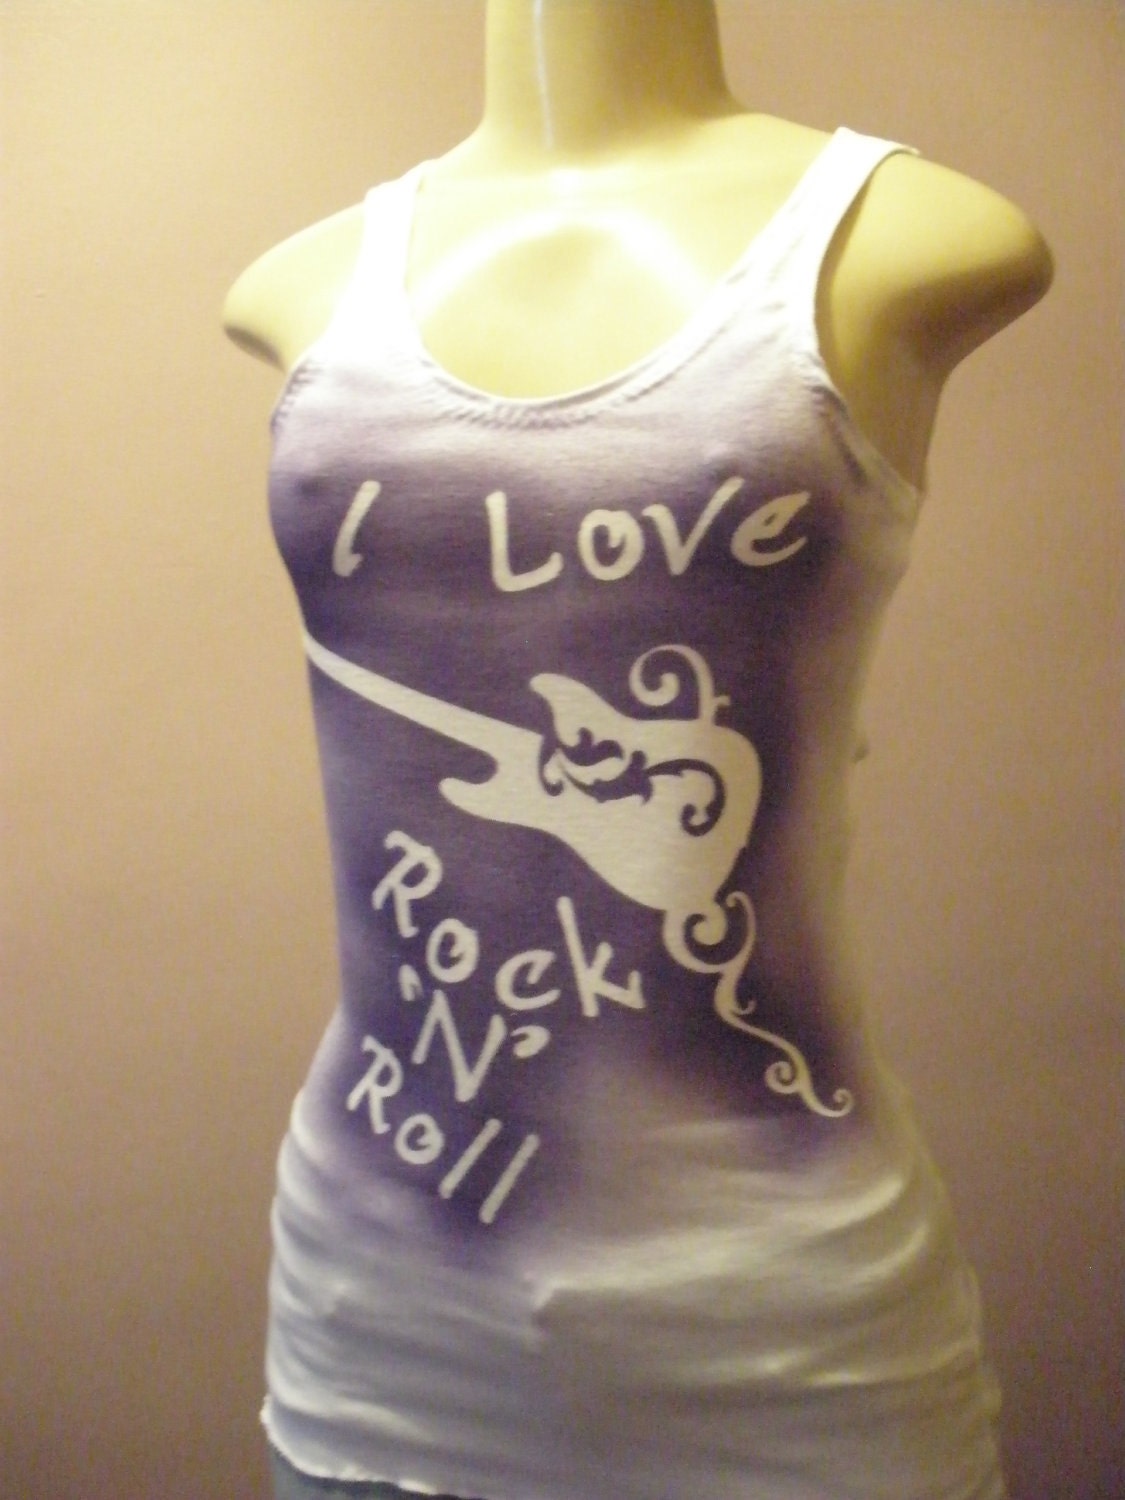 Cool Looking Sleeveless Tank Top with Unique Message ( I Love Rock N Roll ) Size Small/Medium/Large